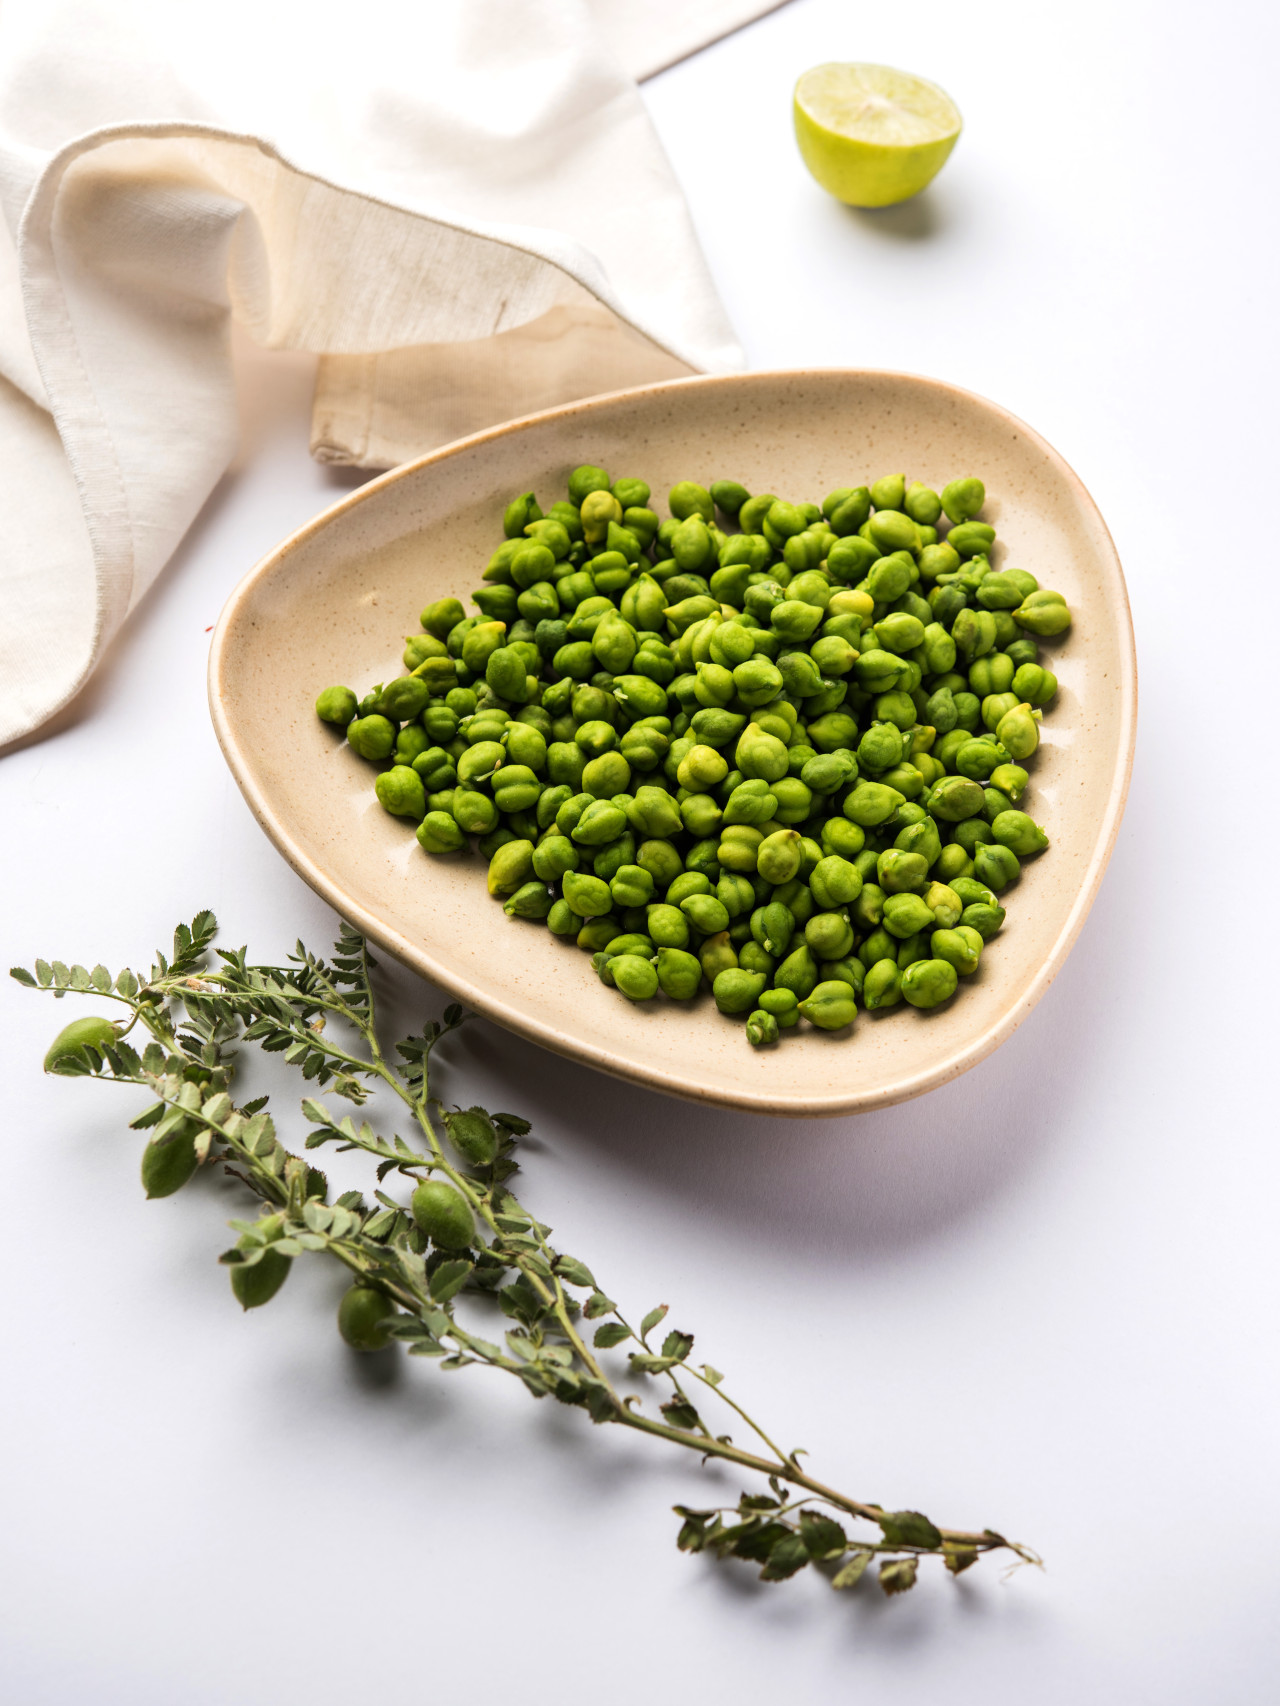 Nutritional Benefits of Green Chickpeas